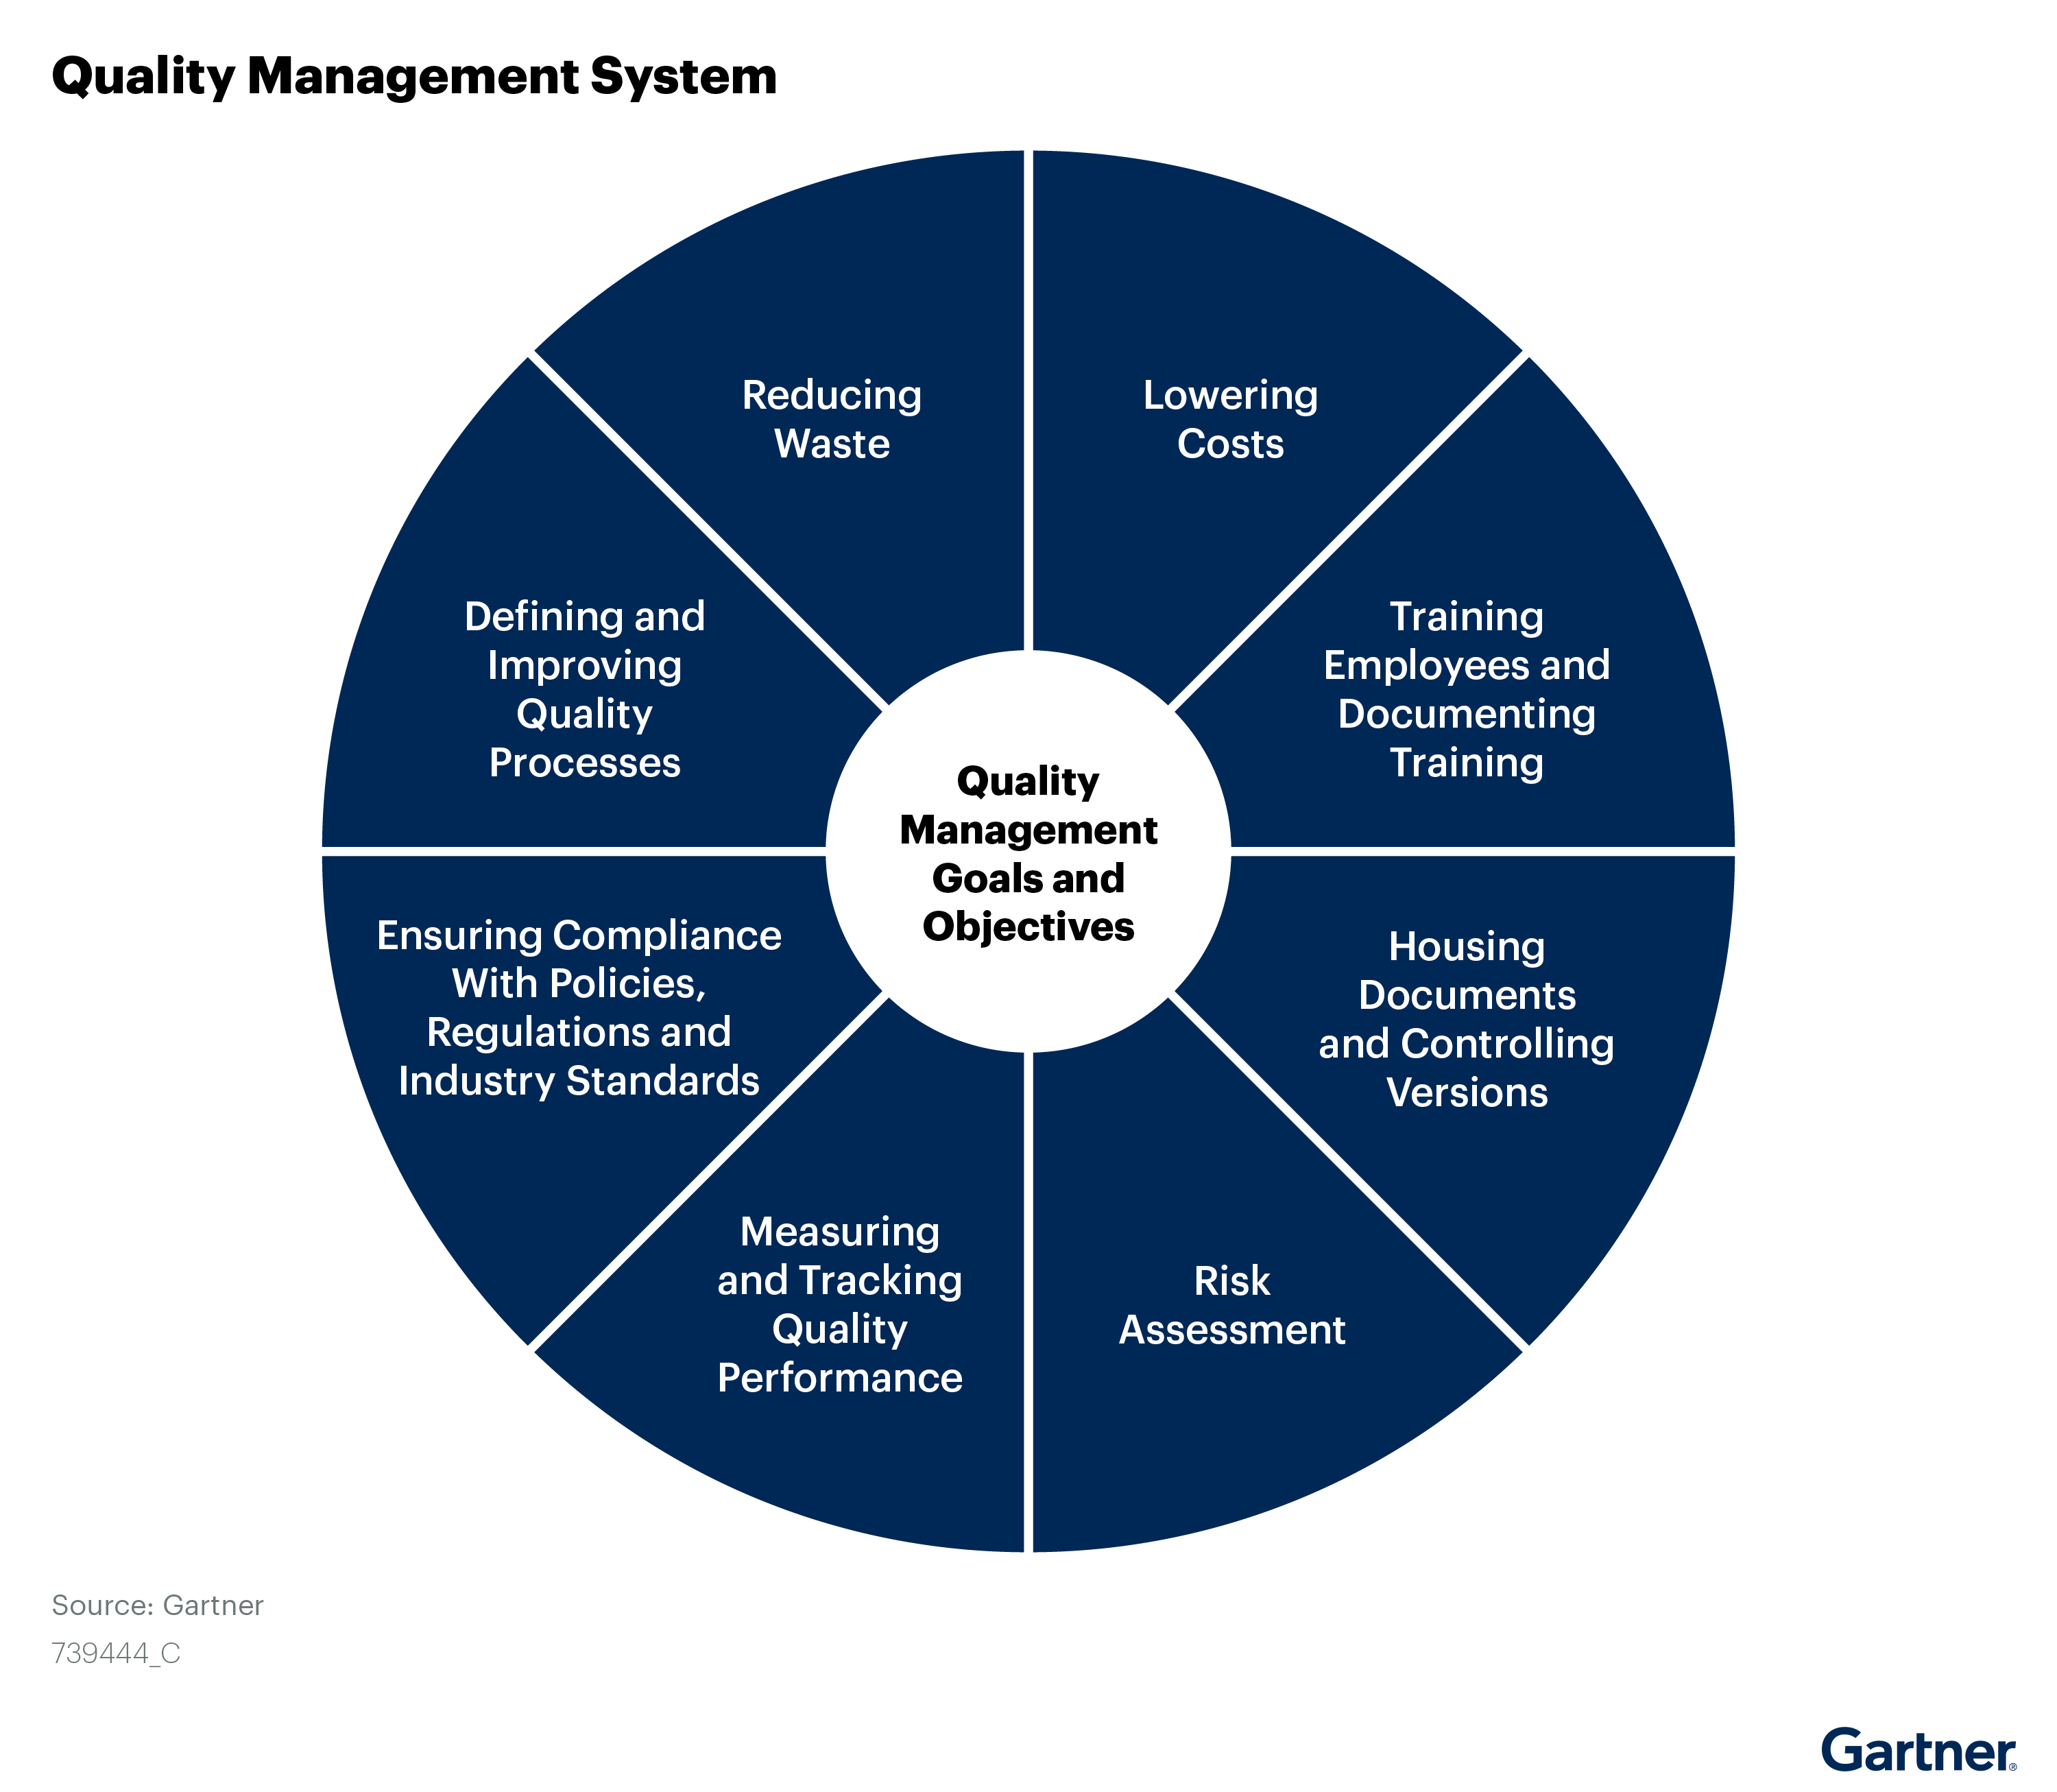 This-figure-details-the-generally-accepted-core-goals-for-QMS-solutions-to-improve-quality-processes-in-an-organization-target